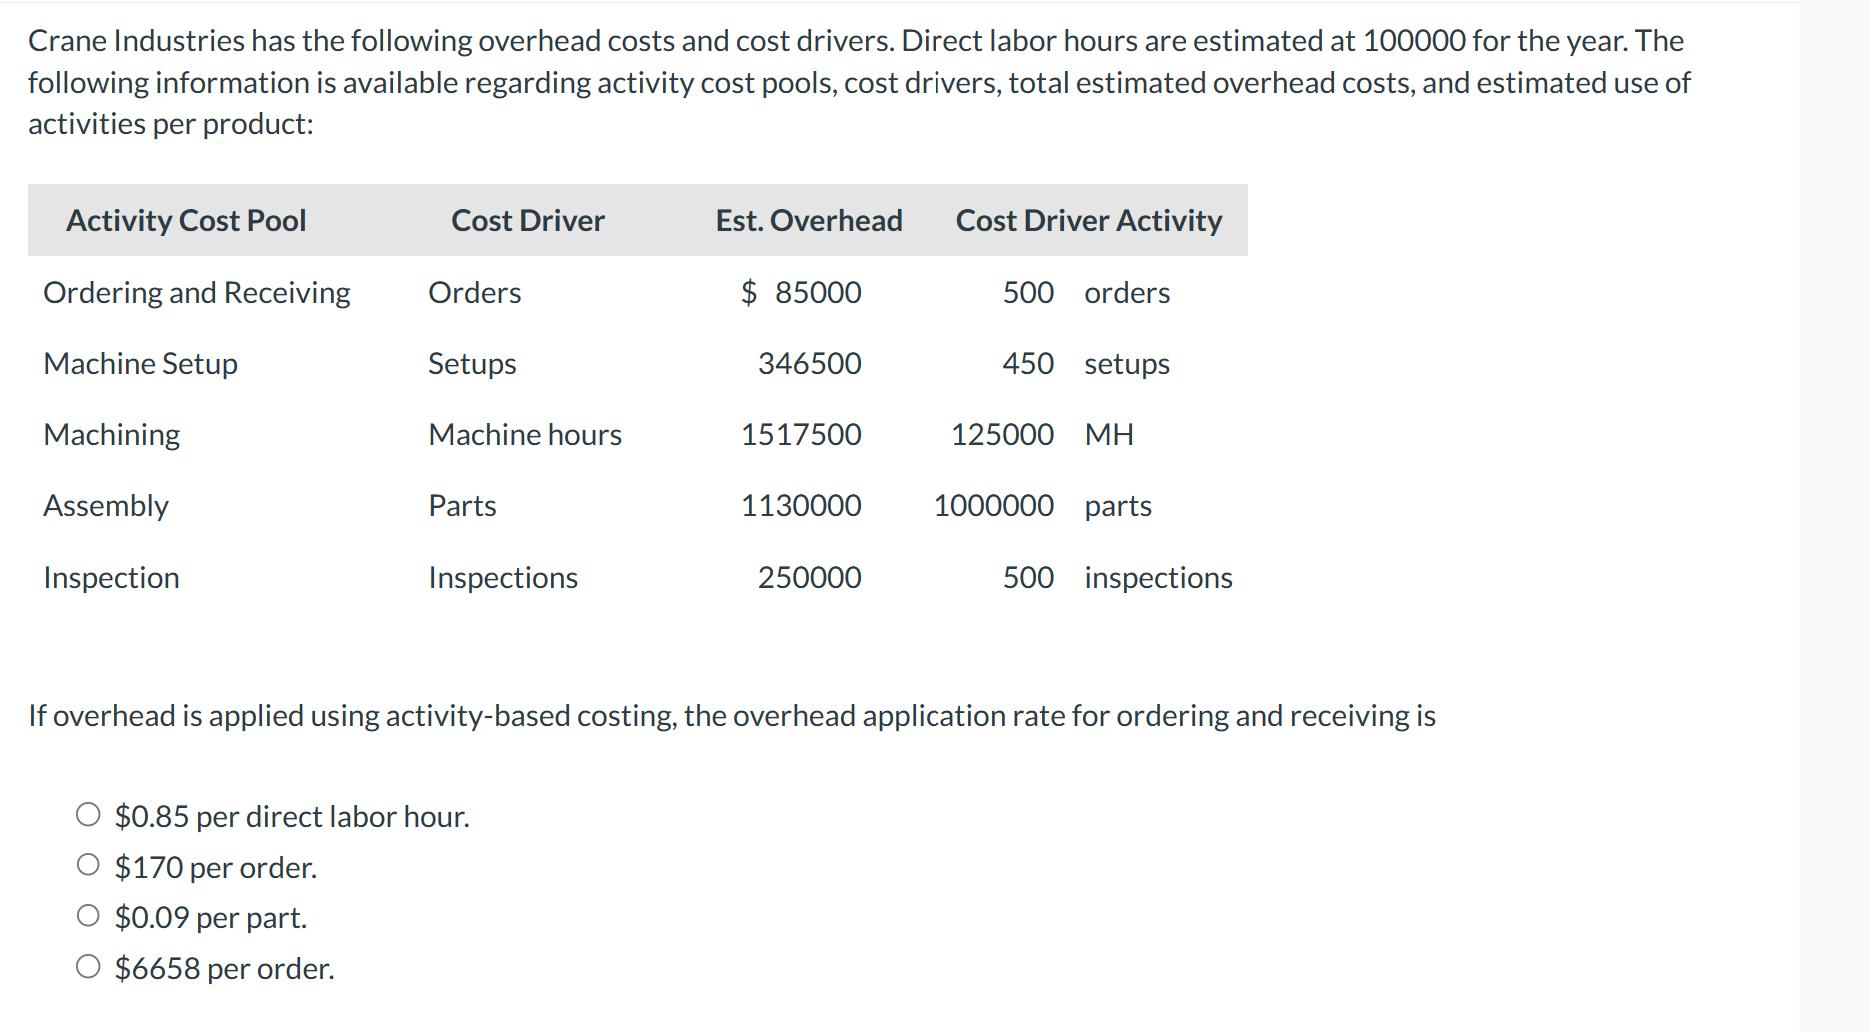 Crane Industries has the following overhead costs and cost drivers. Direct labor hours are estimated at